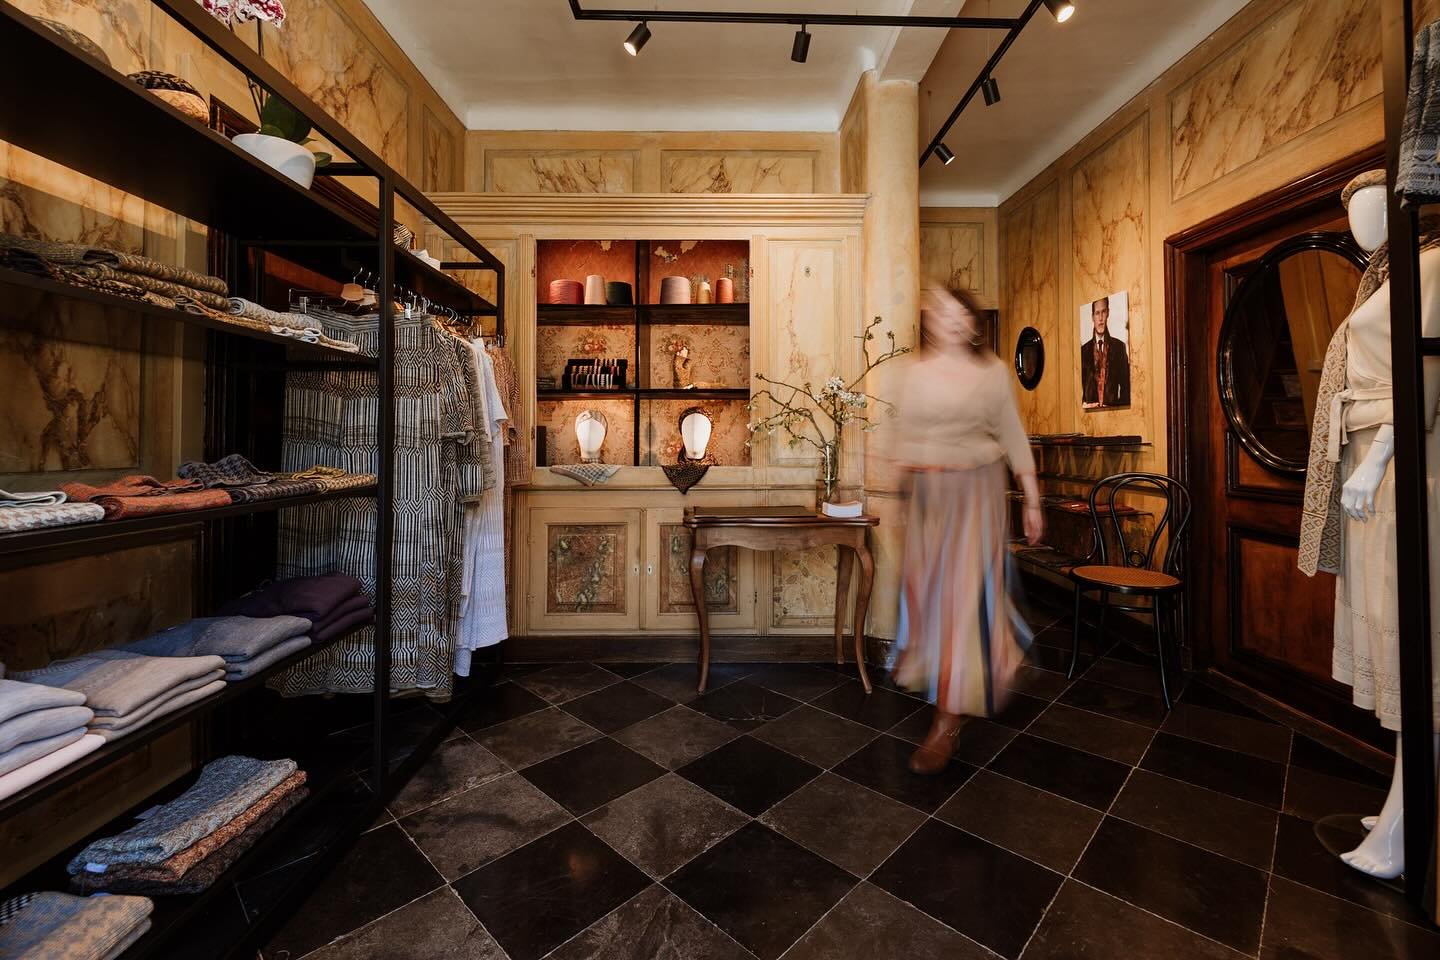 ✨ Step into history and elegance at our newly renewed shop nestled in the hand-painted hallway of an 18th-century palace in the center of the charming city Thorn. 🏰 Formerly home to one of the &ldquo;forgotten princesses,&rdquo; our space is steeped